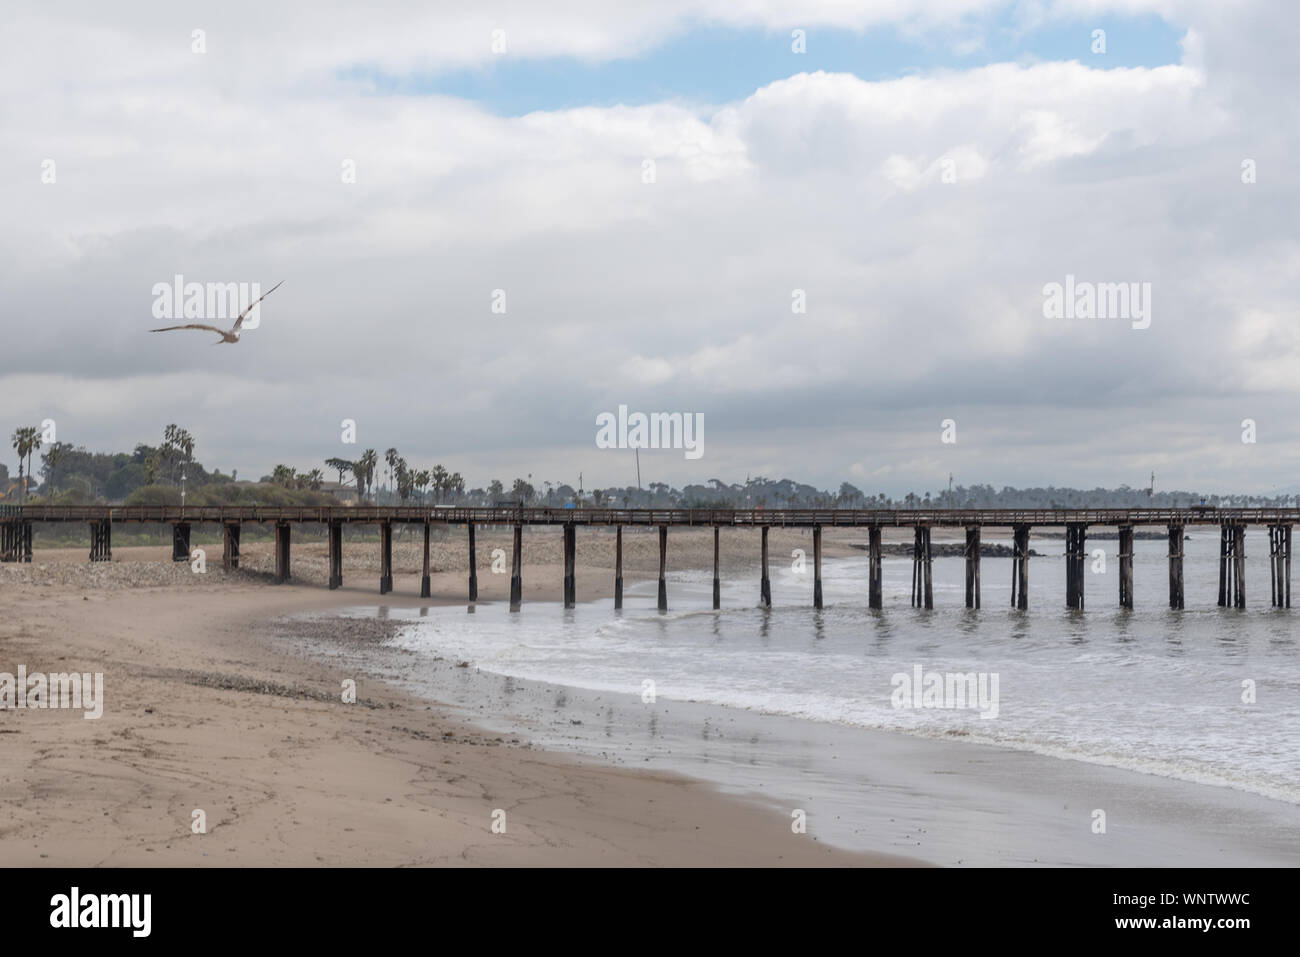 A pier on a cloudy day Stock Photo